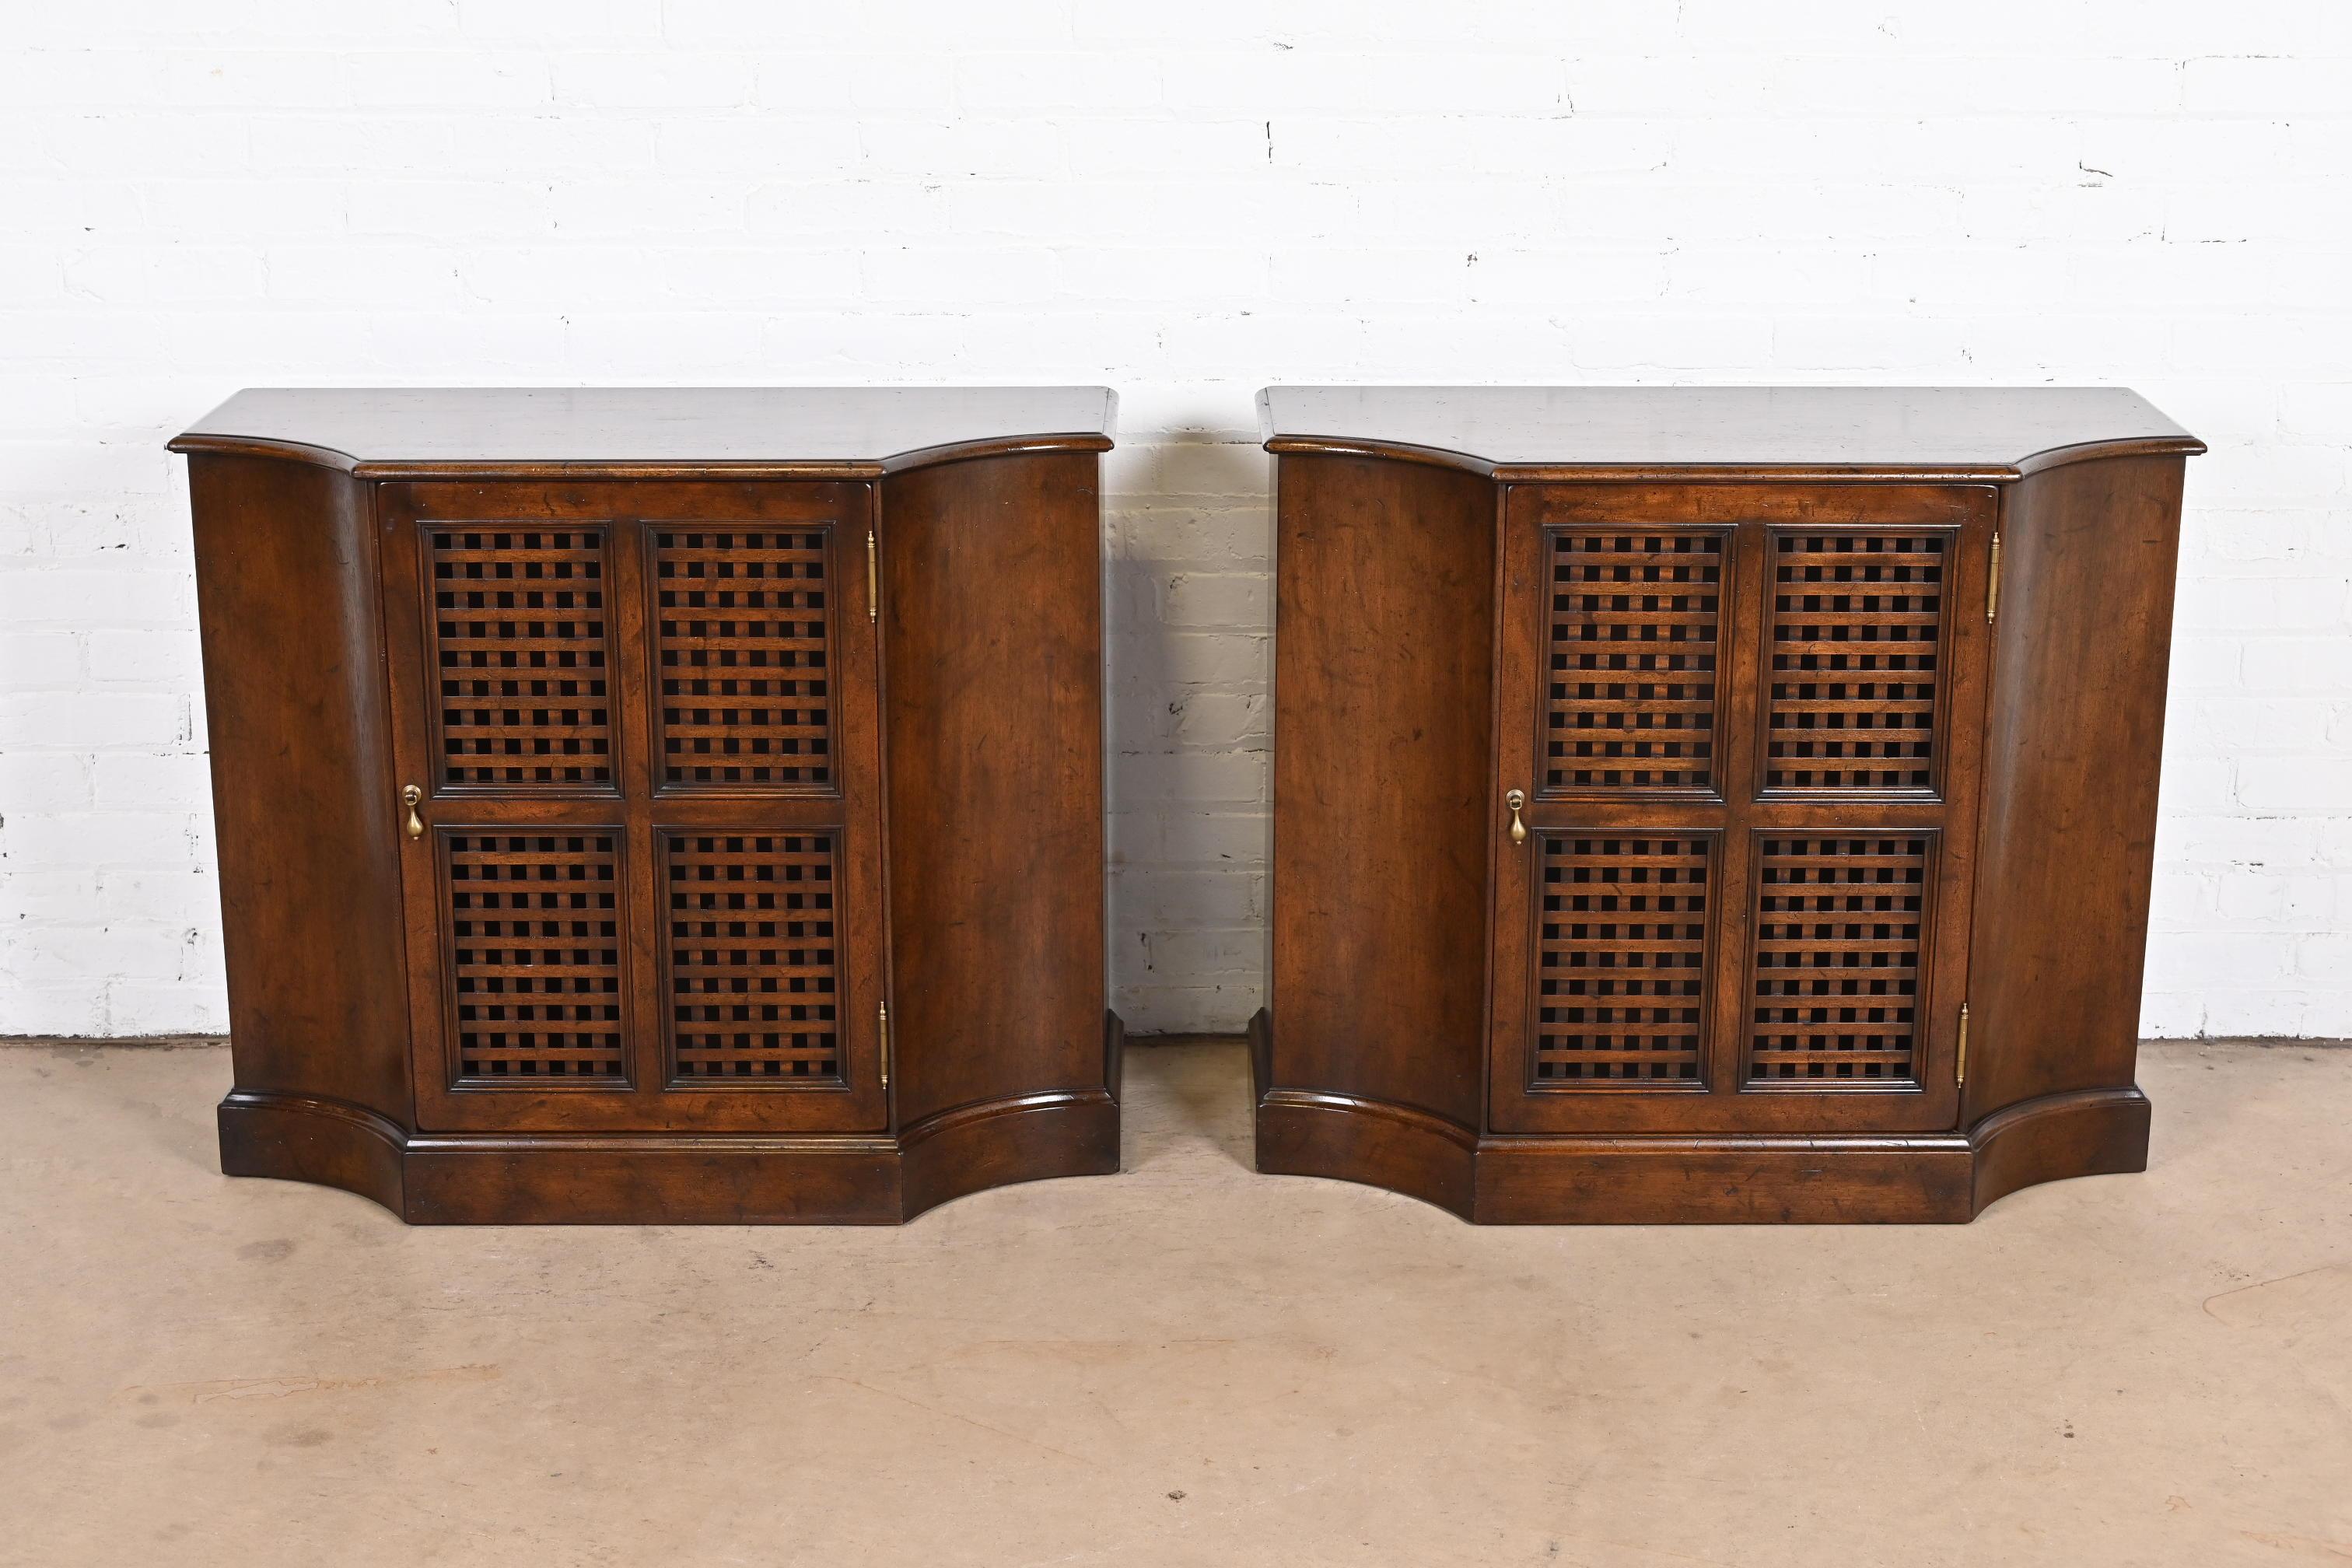 A gorgeous pair of Regency style commodes, consoles, or bedside tables

By Beacon Hill

USA, Mid-20th Century

Carved walnut, with lattice door fronts and original brass hardware.

Measures: 36